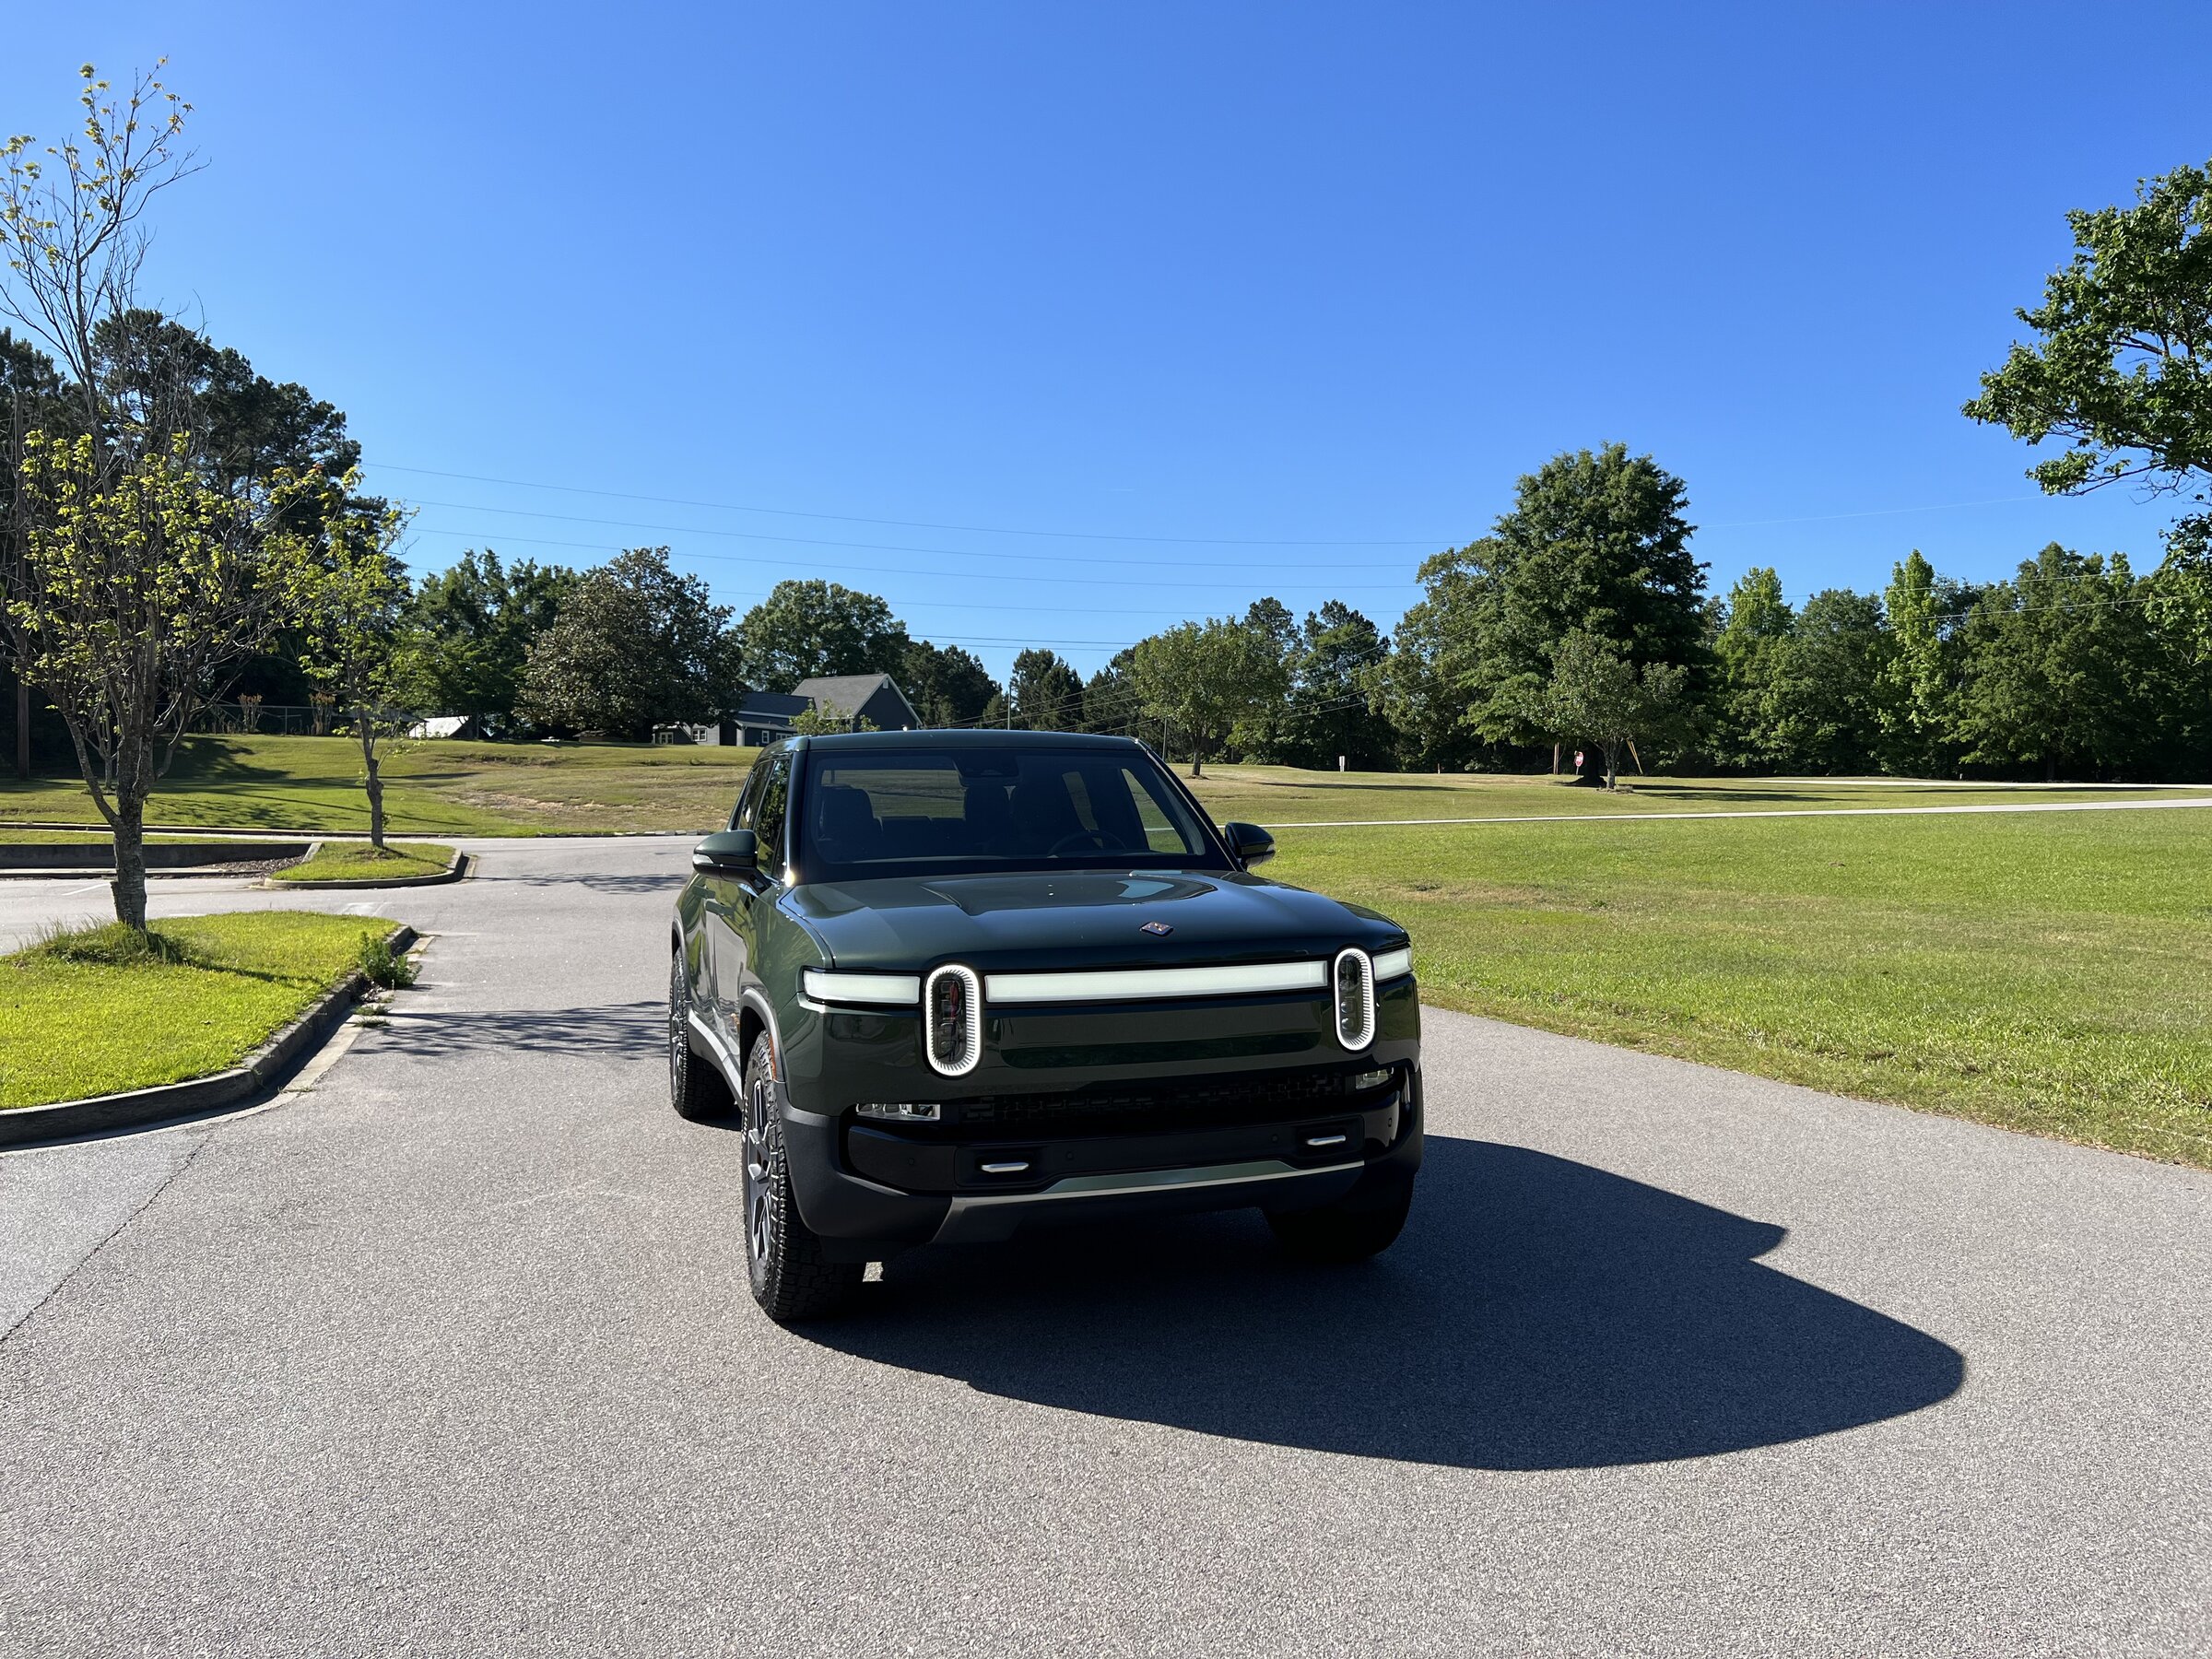 Rivian R1T R1S It's finally here. First impressions IMG_2521.JPG